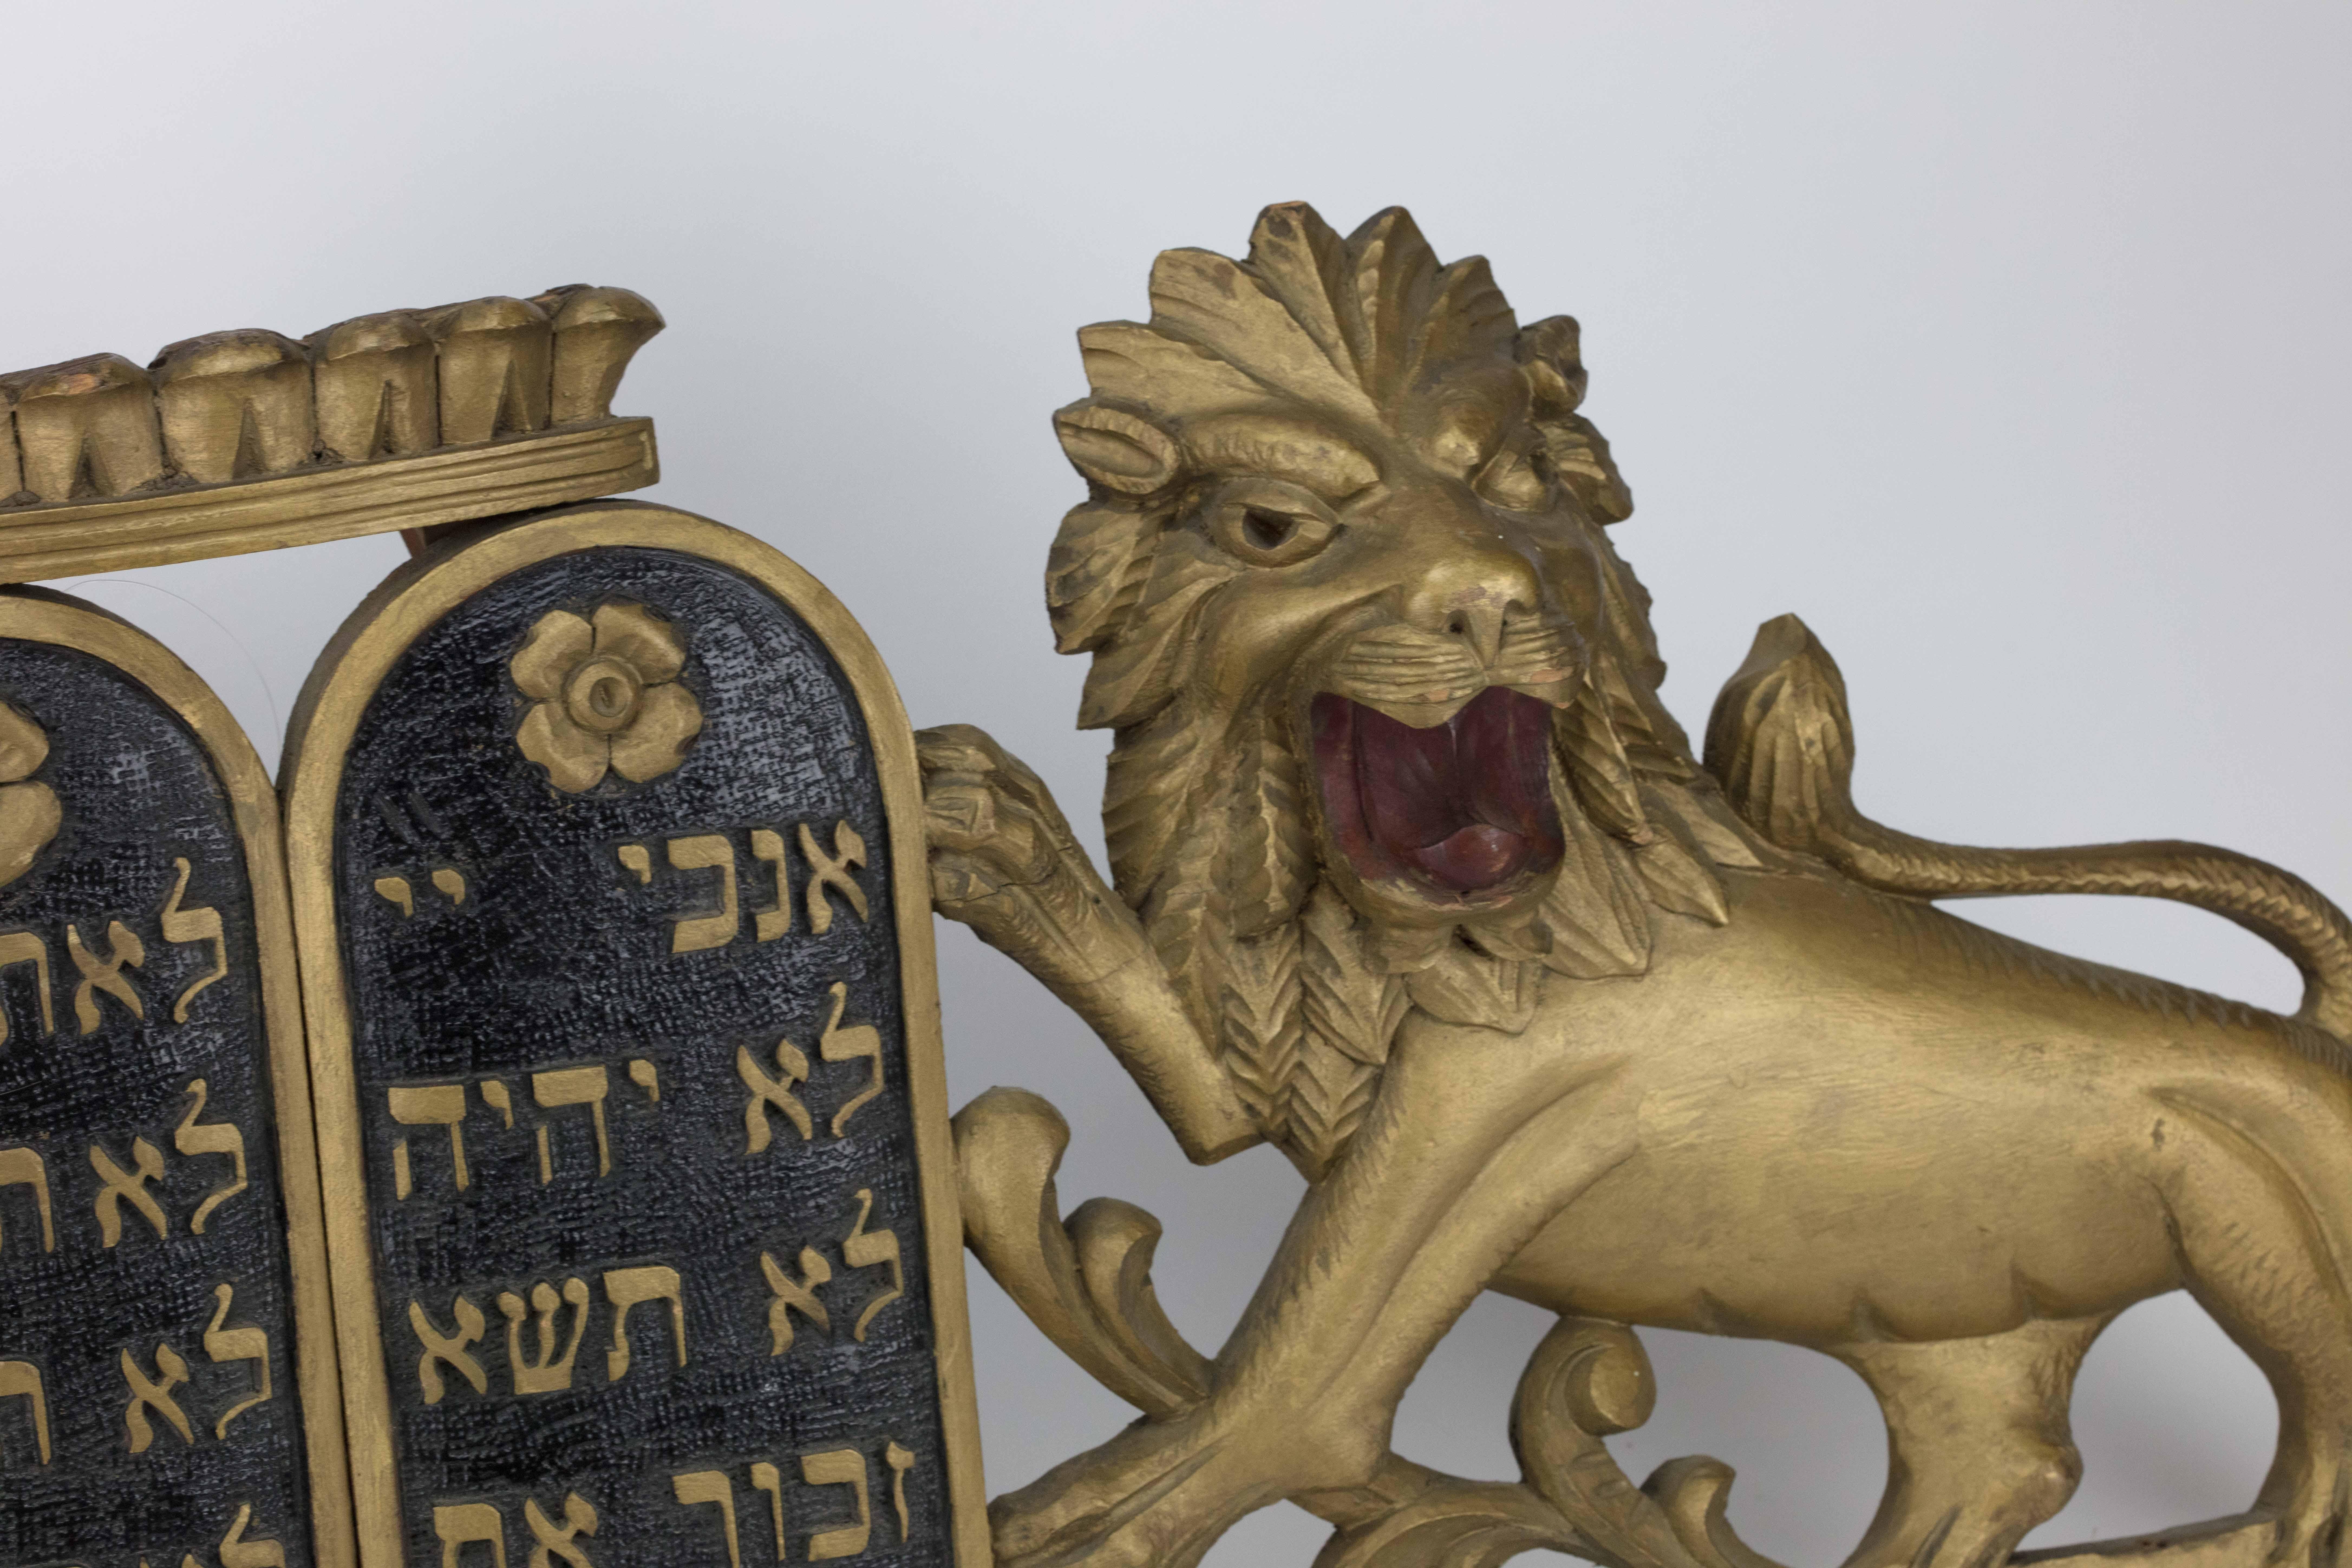 Hand carved wooden ark pediment, gilded lions flanking the Decalogue, USA, circa 1900.
These wood carvings are early examples of Jewish American Folk Art in the early 20th century. They show how a form of art initially designed for carousel